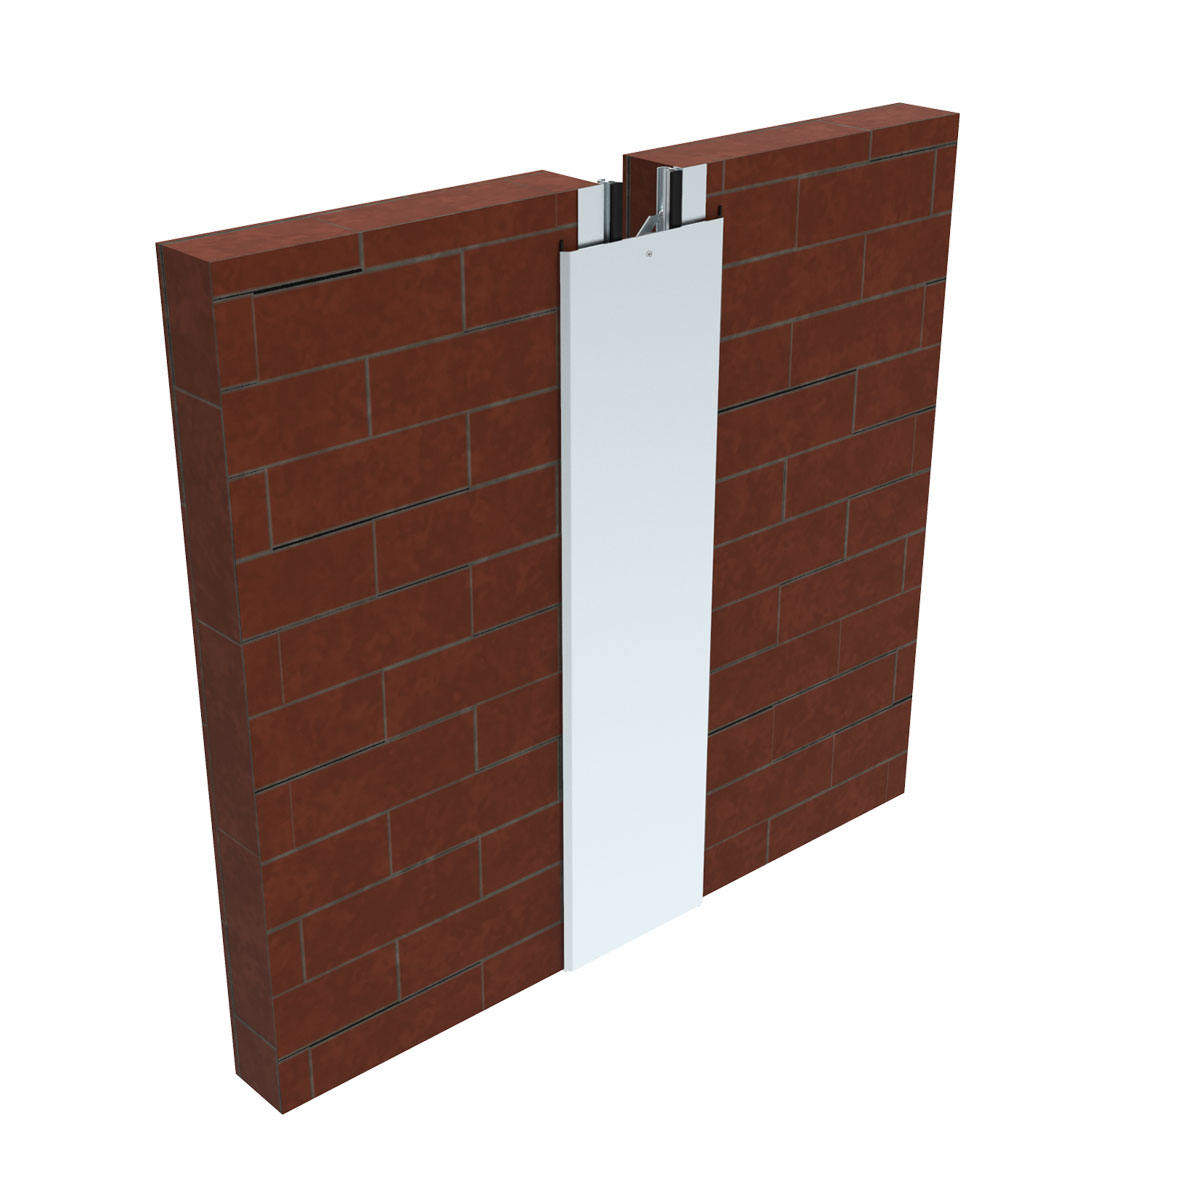 Seismic Wall To Wall Expansion Joint Cover For Drywall